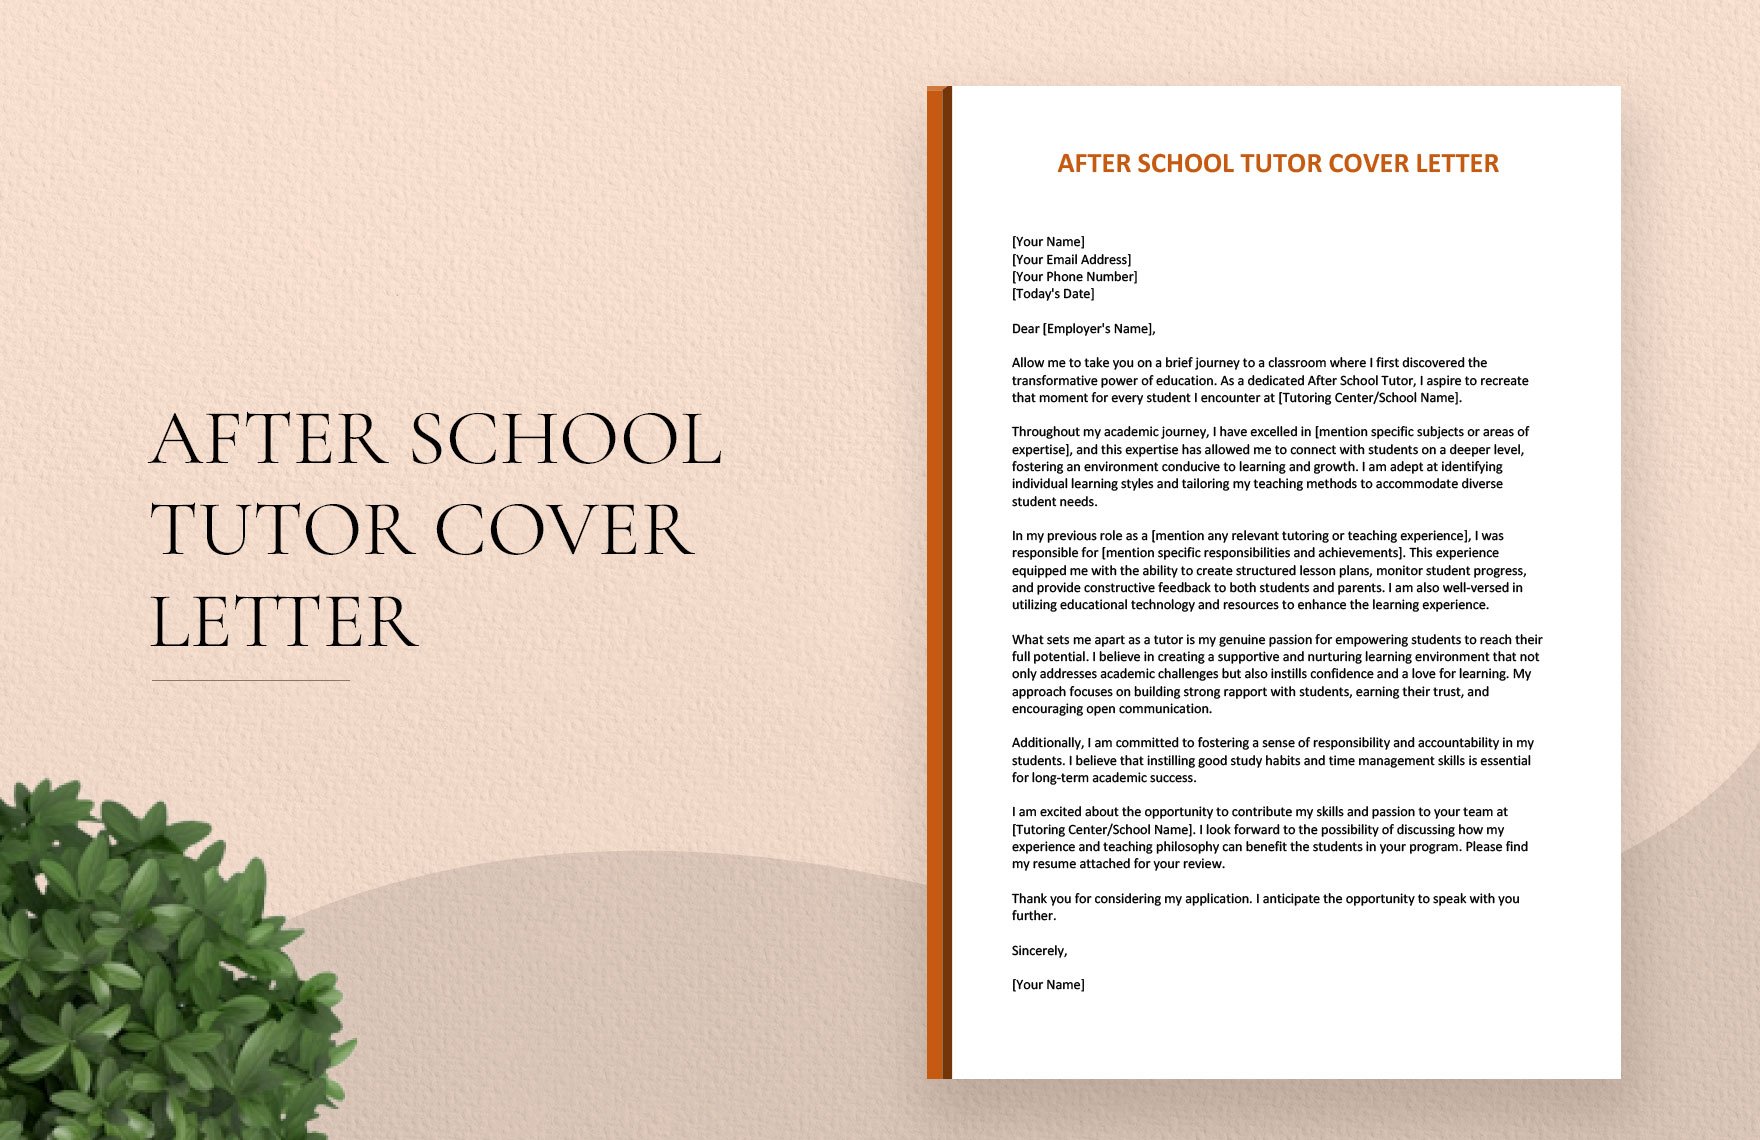 After School Tutor Cover Letter in Word, Google Docs